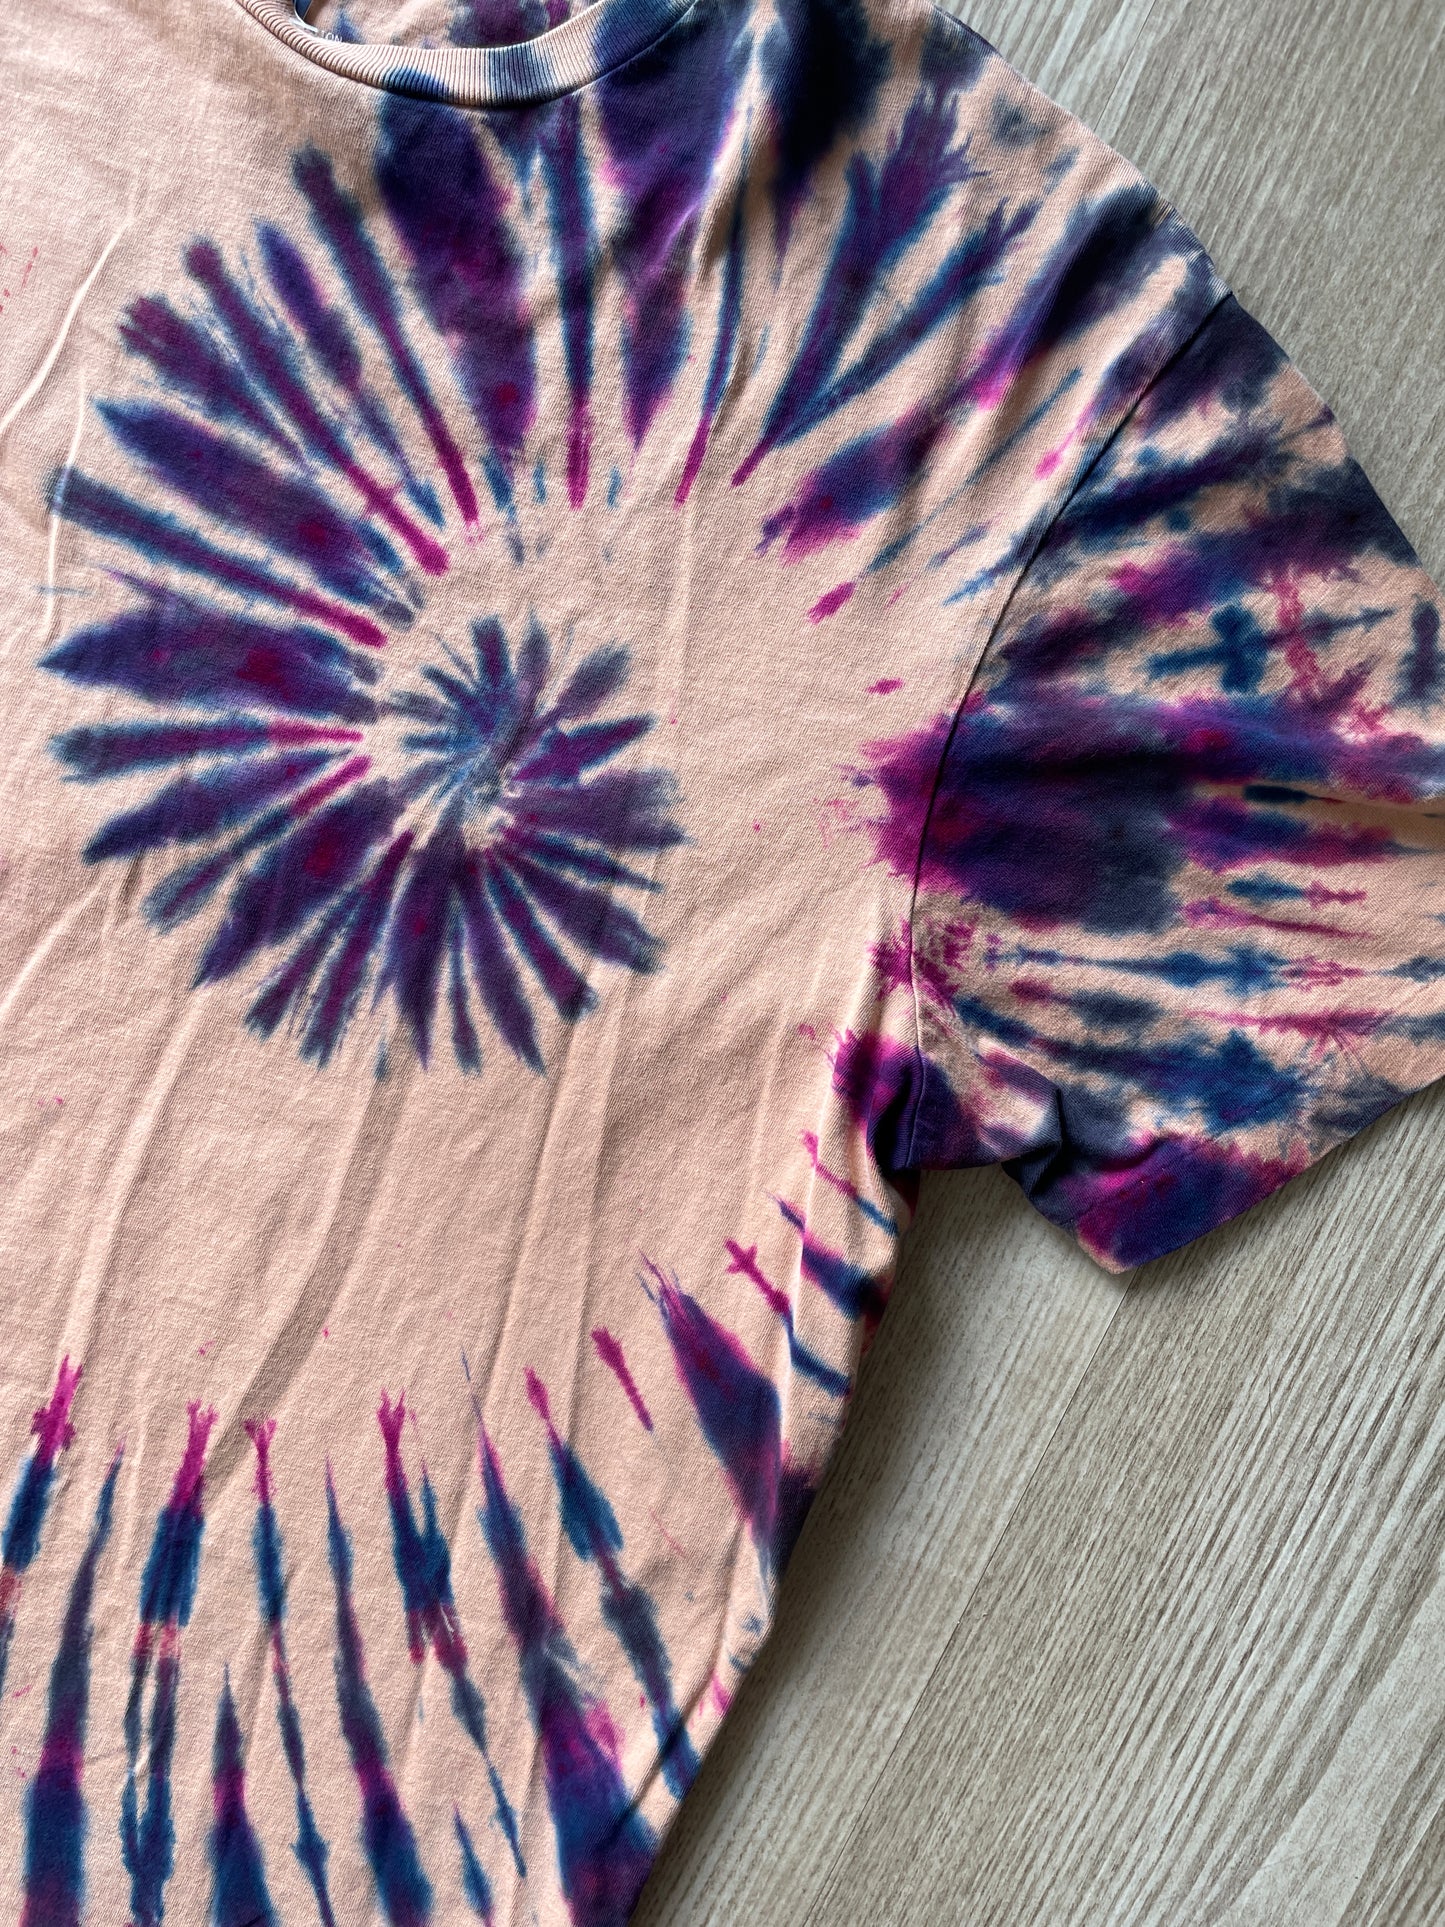 LARGE Men's Prickly Pear Cactus Tie Dye T-Shirt | One-Of-a-Kind Pink and Purple Spiral Short Sleeve